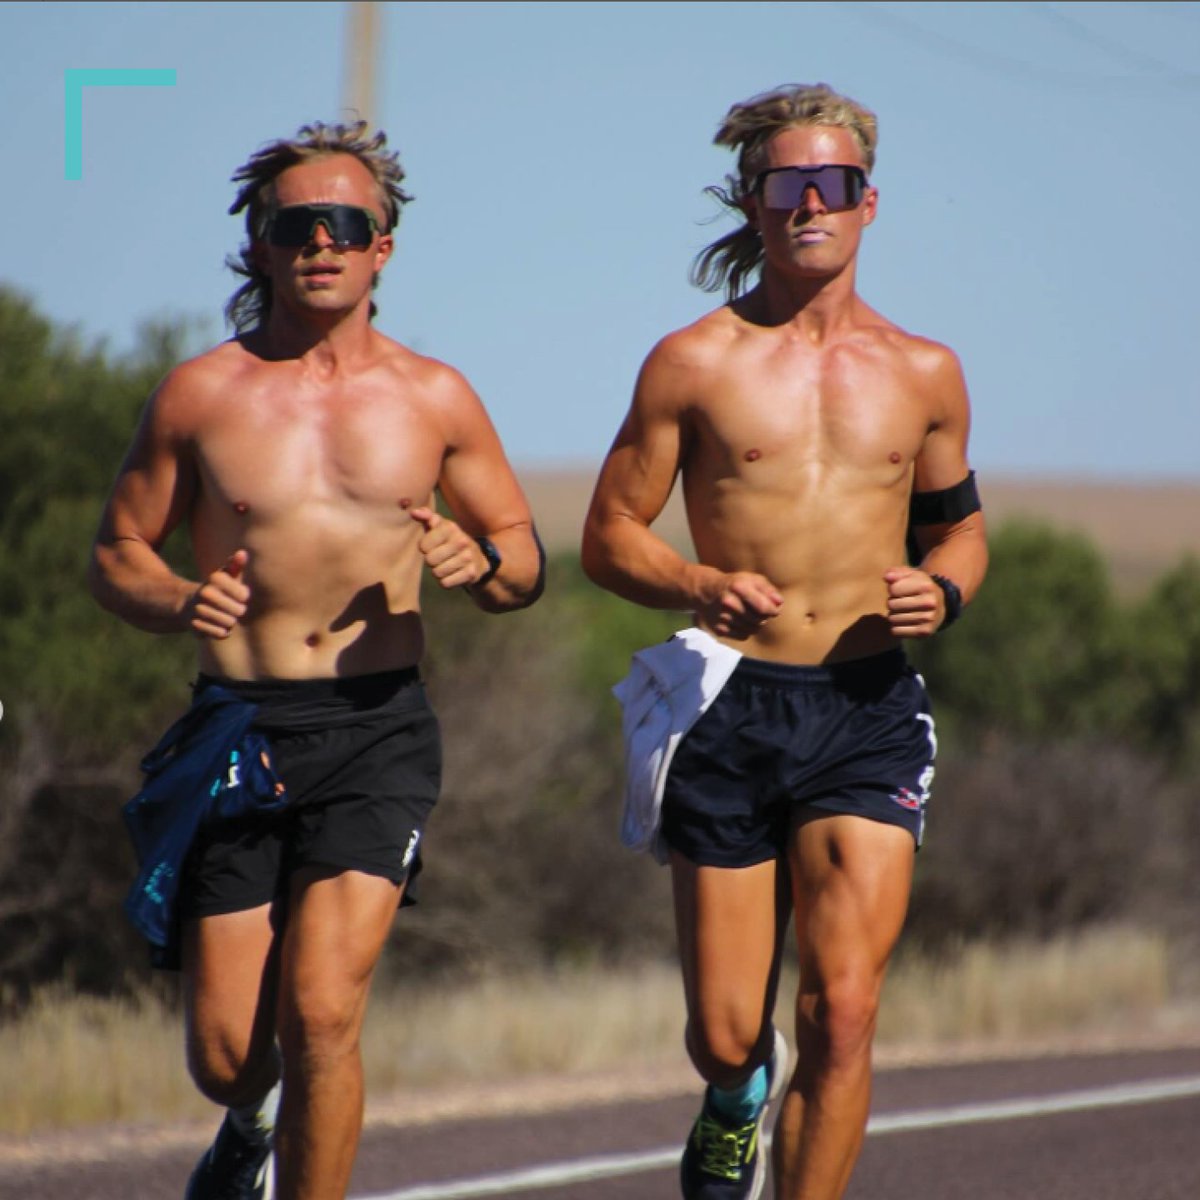 The Lambros have smashed their fundraising goal, raising over $100,000 to support lifesaving cancer research. With only 36 days remaining before they cross the finish line, they are still on a mission to raise as much as they can. Donate in support today: bit.ly/3UhbX7l